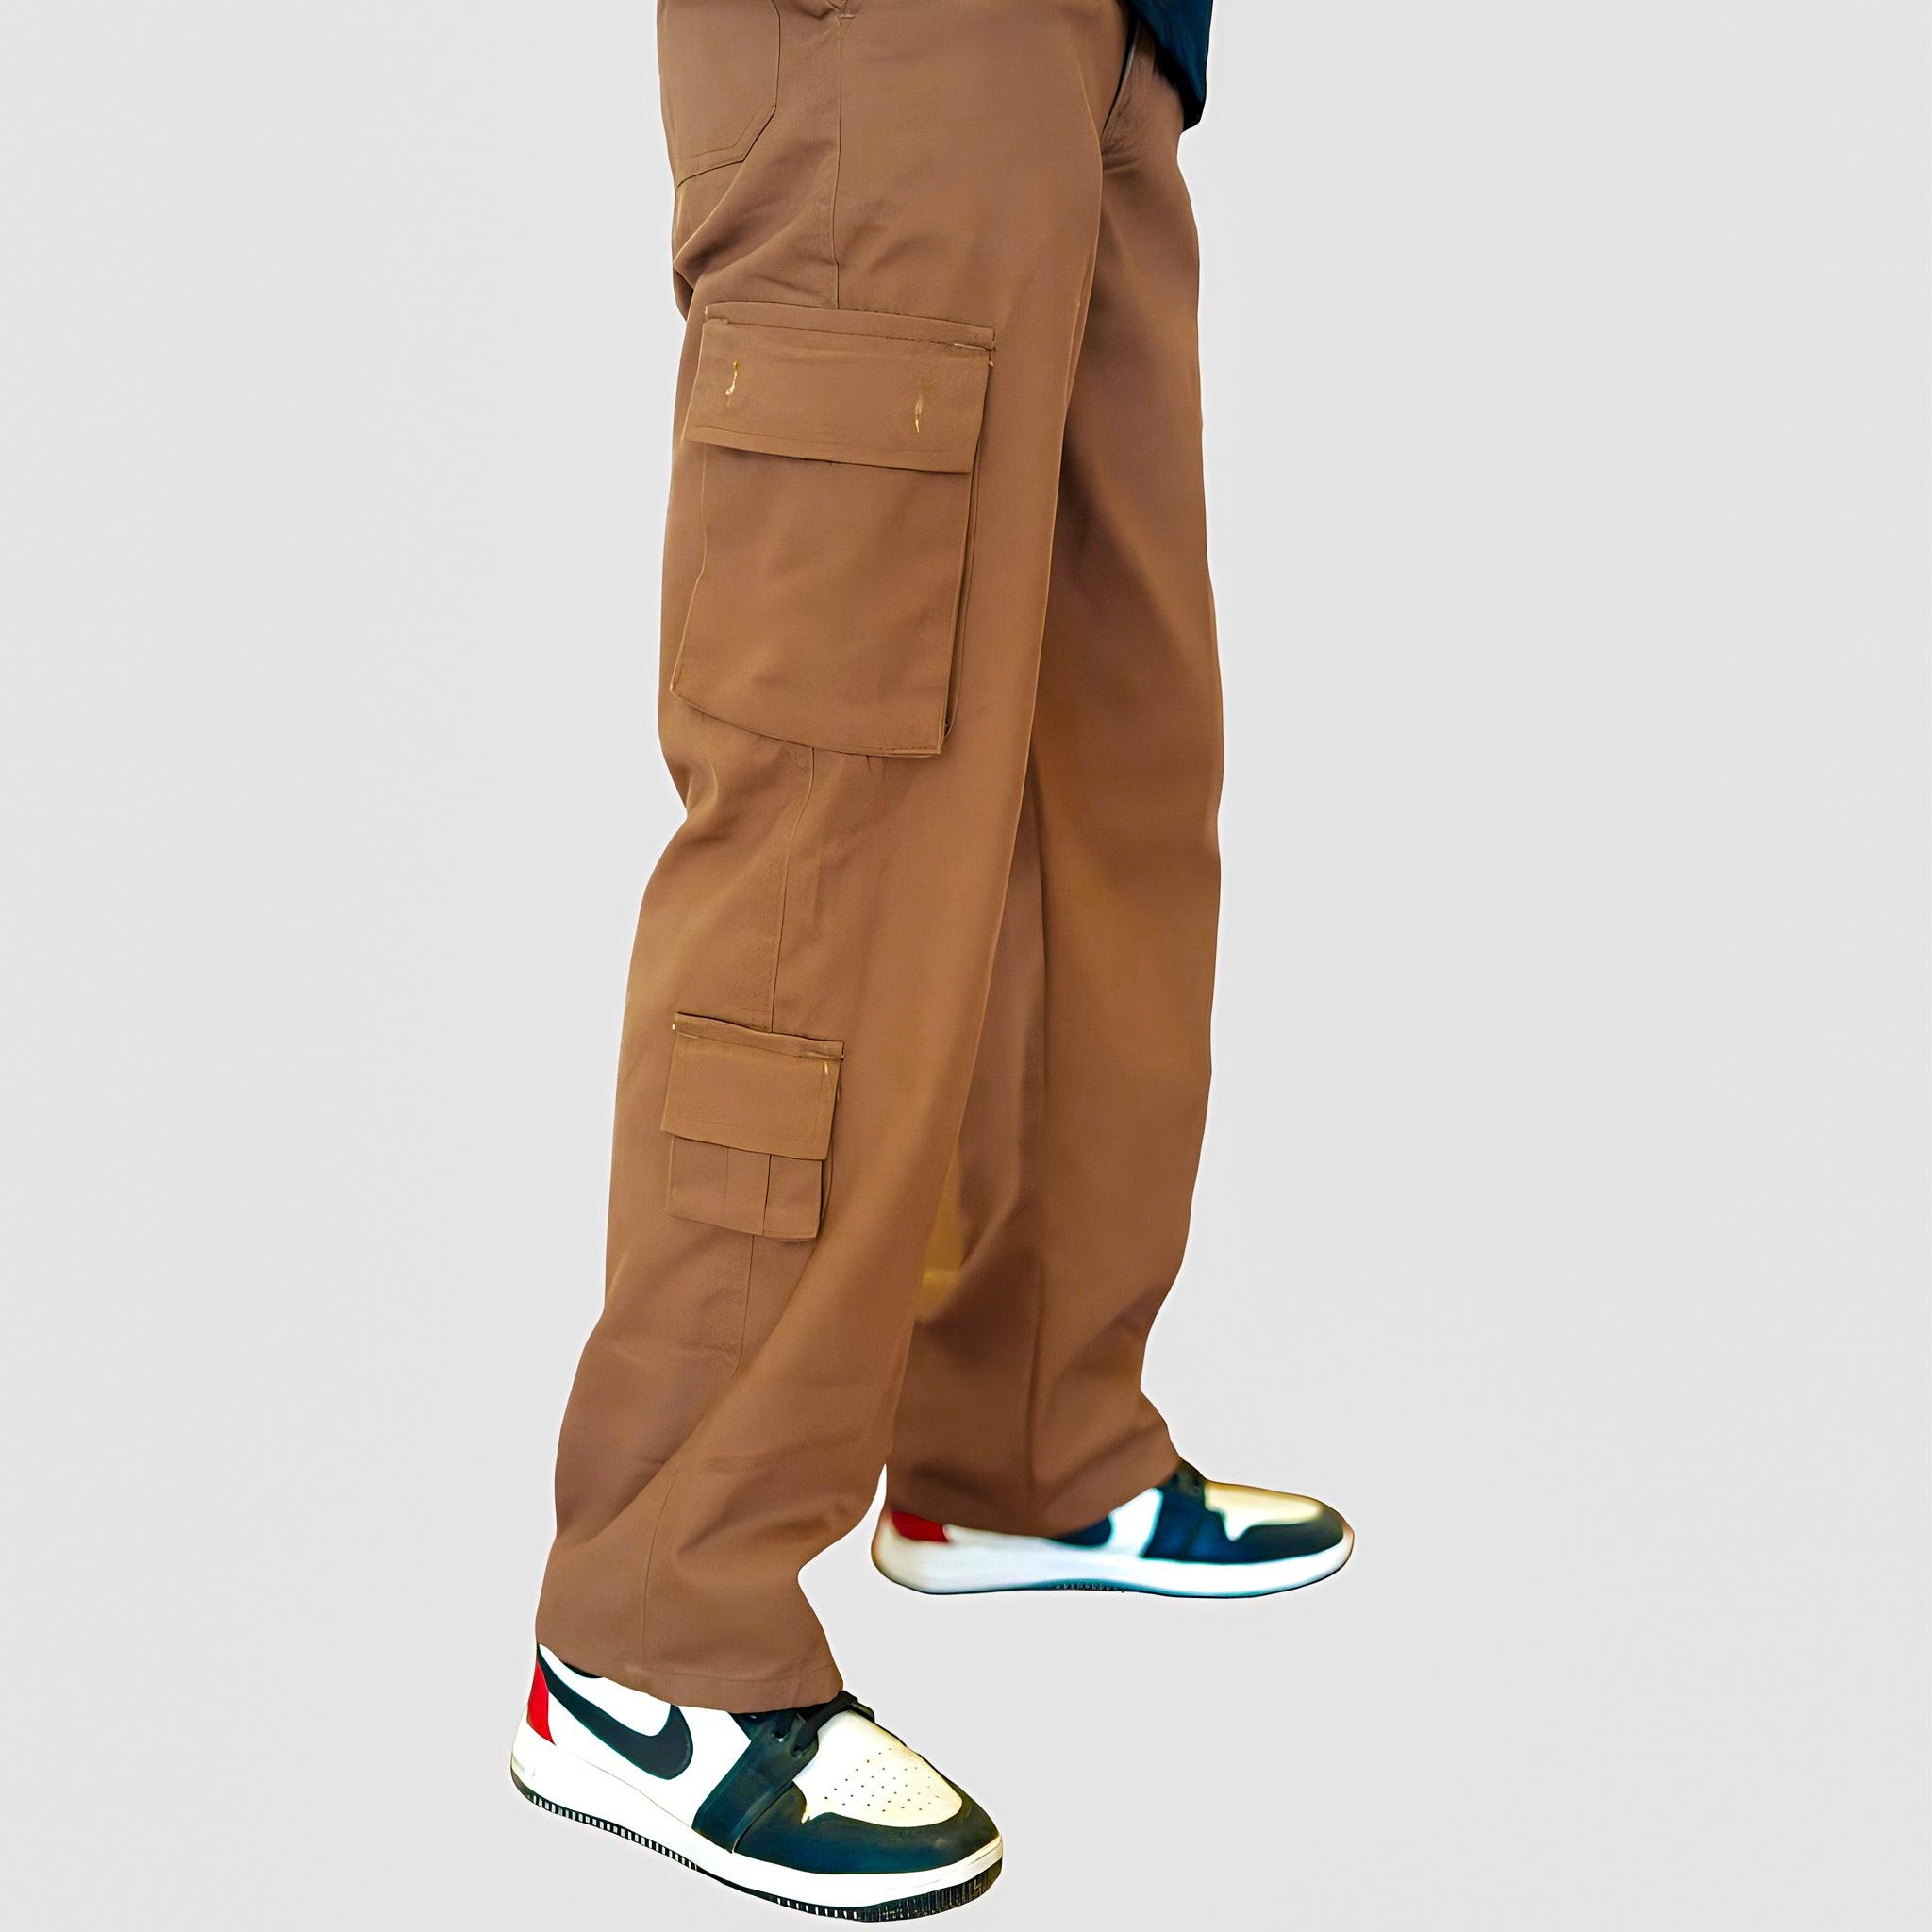 VIRJEANS (VJC811) Stretchable Double Cargo Box Pant (8 Pocket) For Men -  VIRJEANS - Clothing Brand Of Nepal